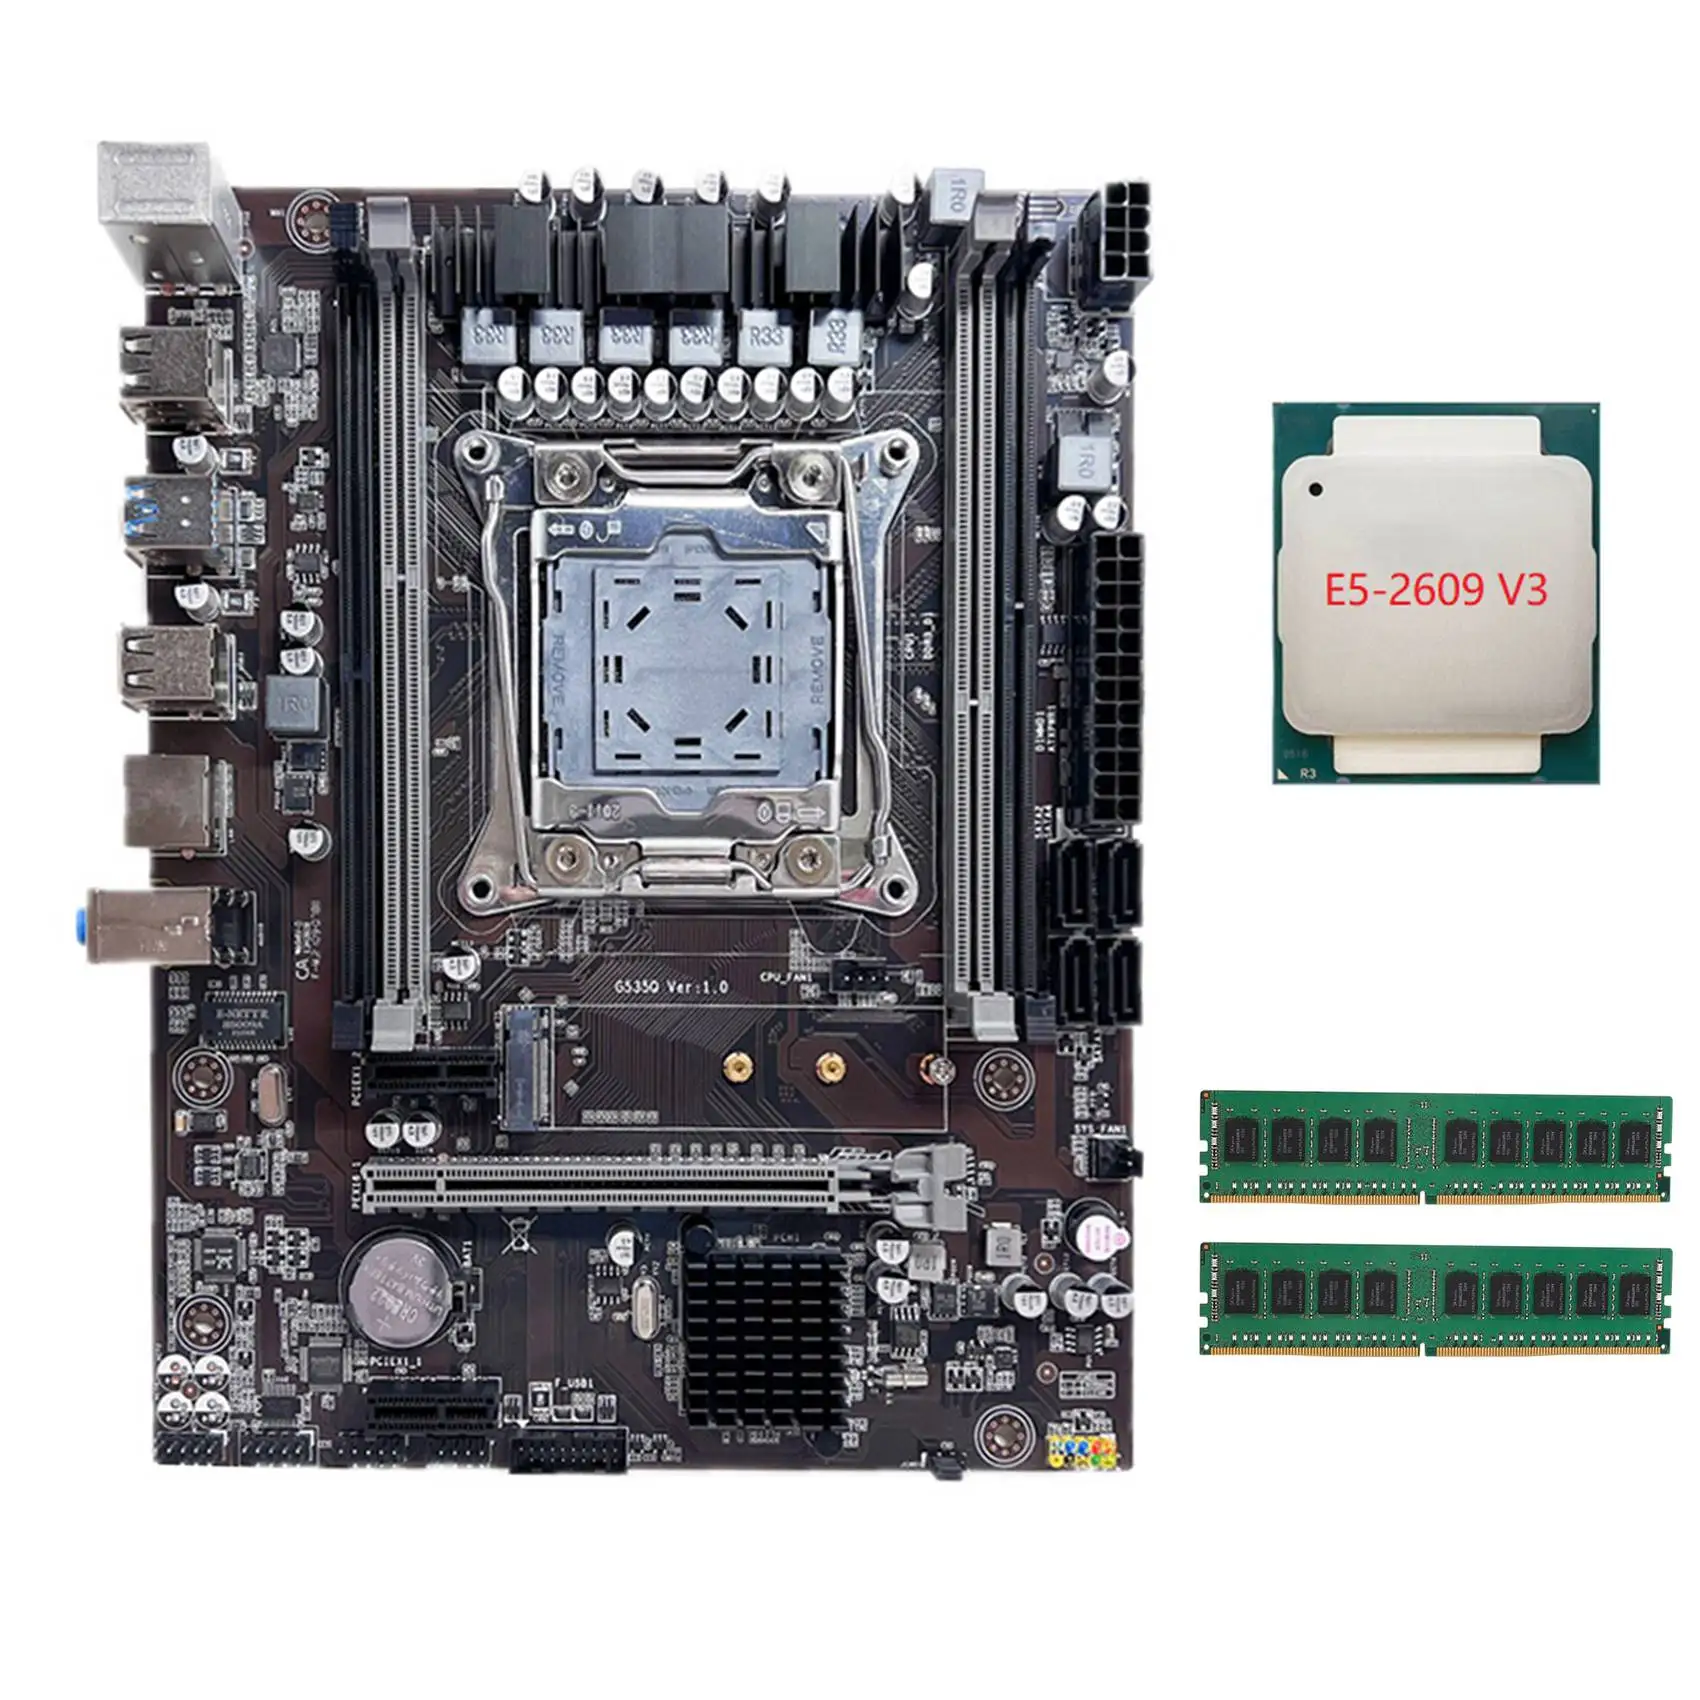 

X99 Motherboard LGA2011-3 Computer Motherboard Support Dual Channel DDR4 RAM with E5 2609 V3 CPU+2XDDR4 4GB 2133Mhz RAM